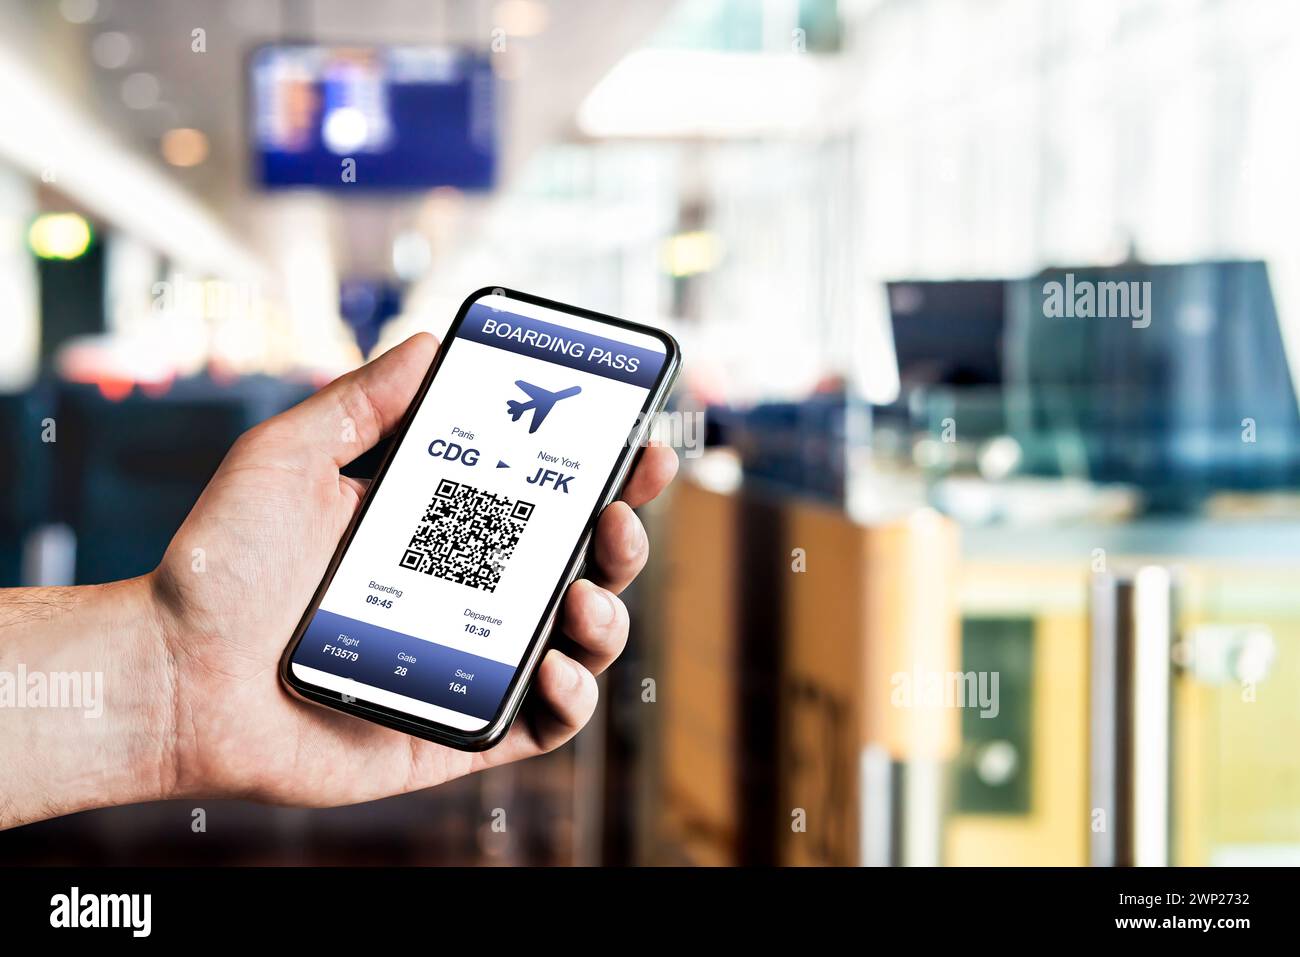 Boarding pass in phone at airport. Electronic flight ticket. Digital mobile app with QR code. Airplane travel with modern airline. Stock Photo